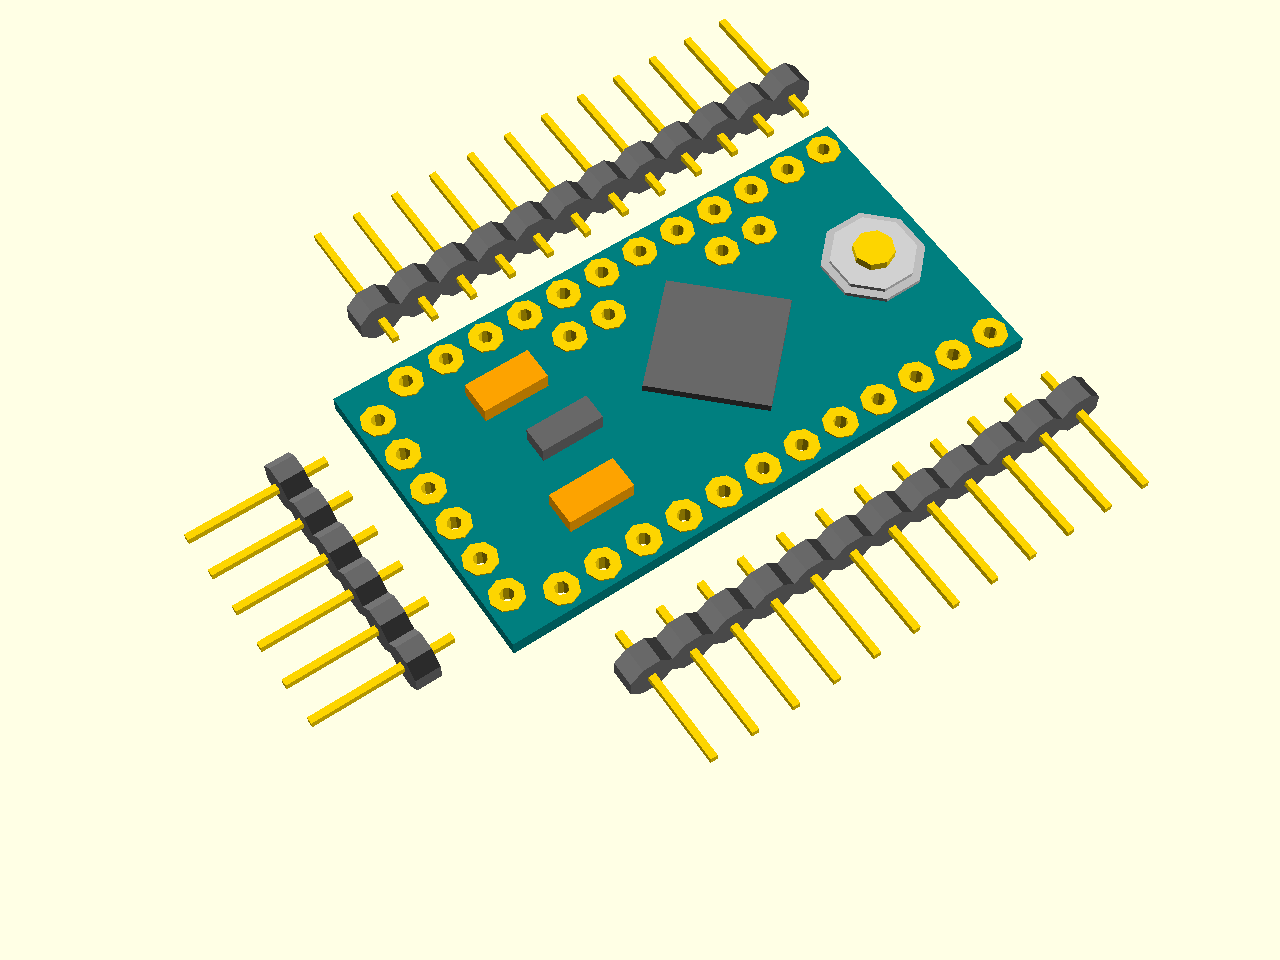 _images/bom-arduino.png